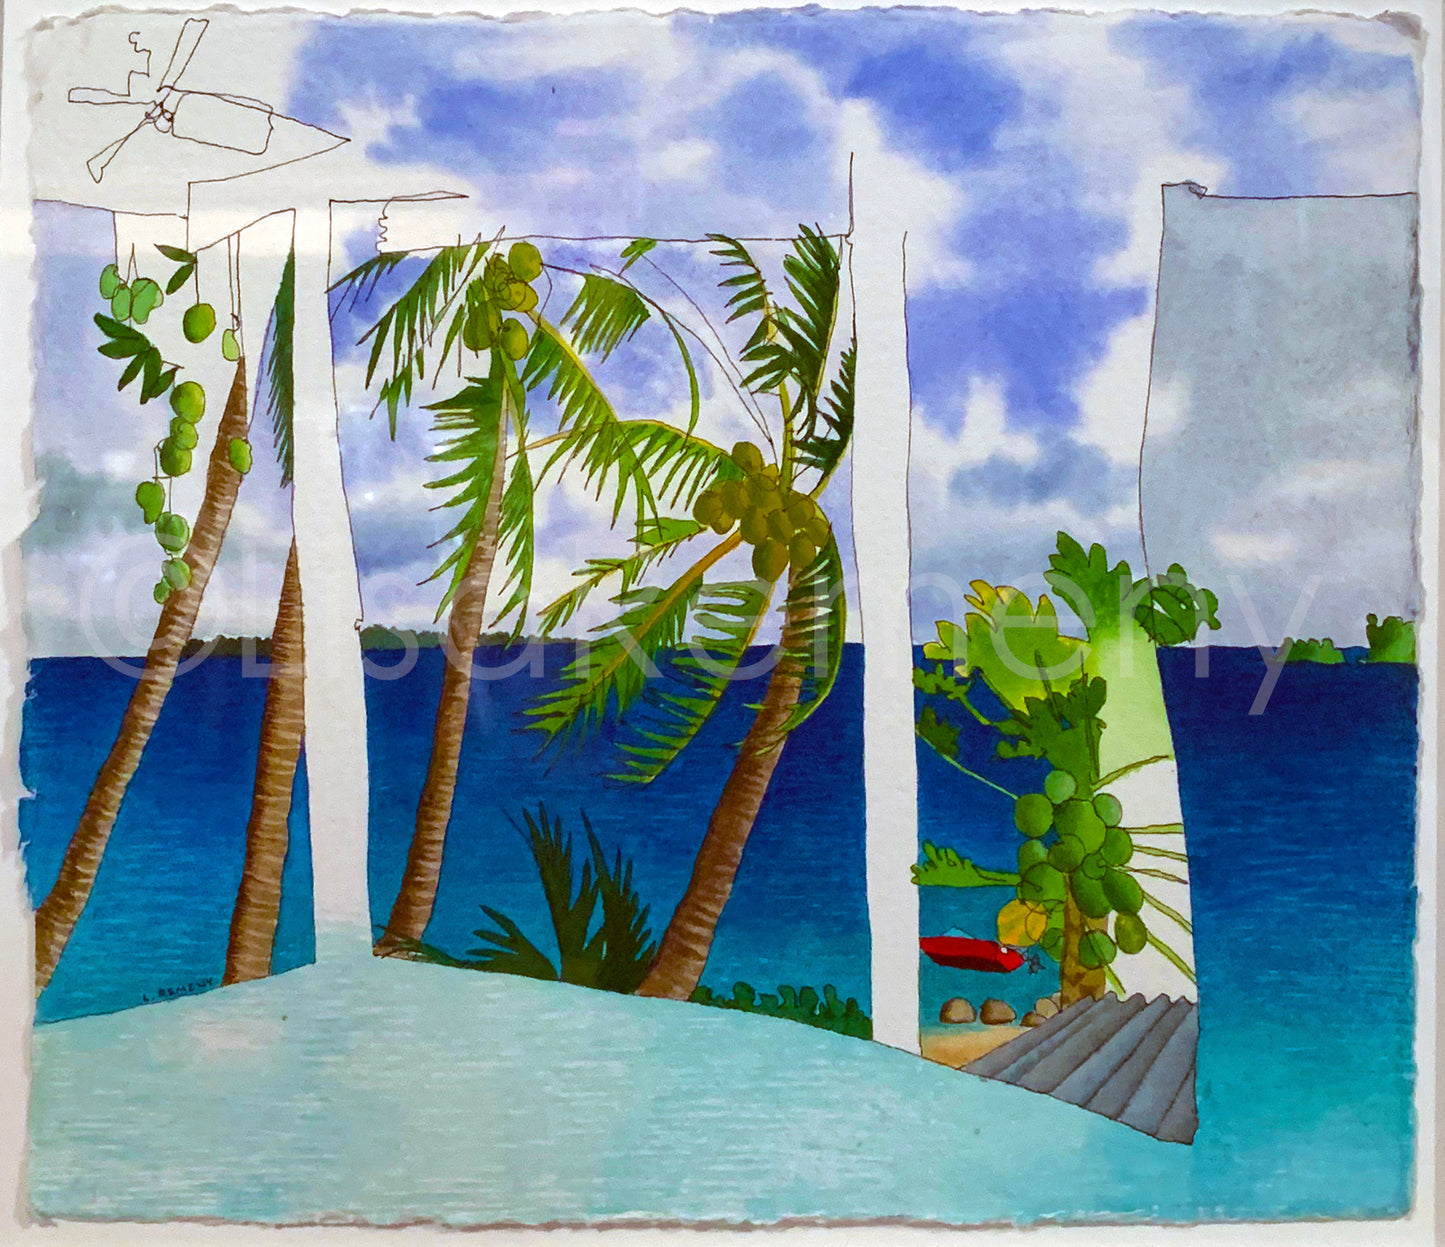 Archive - Watercolor + Ink on Paper - Coconut Grove in Taveuni, Fiji